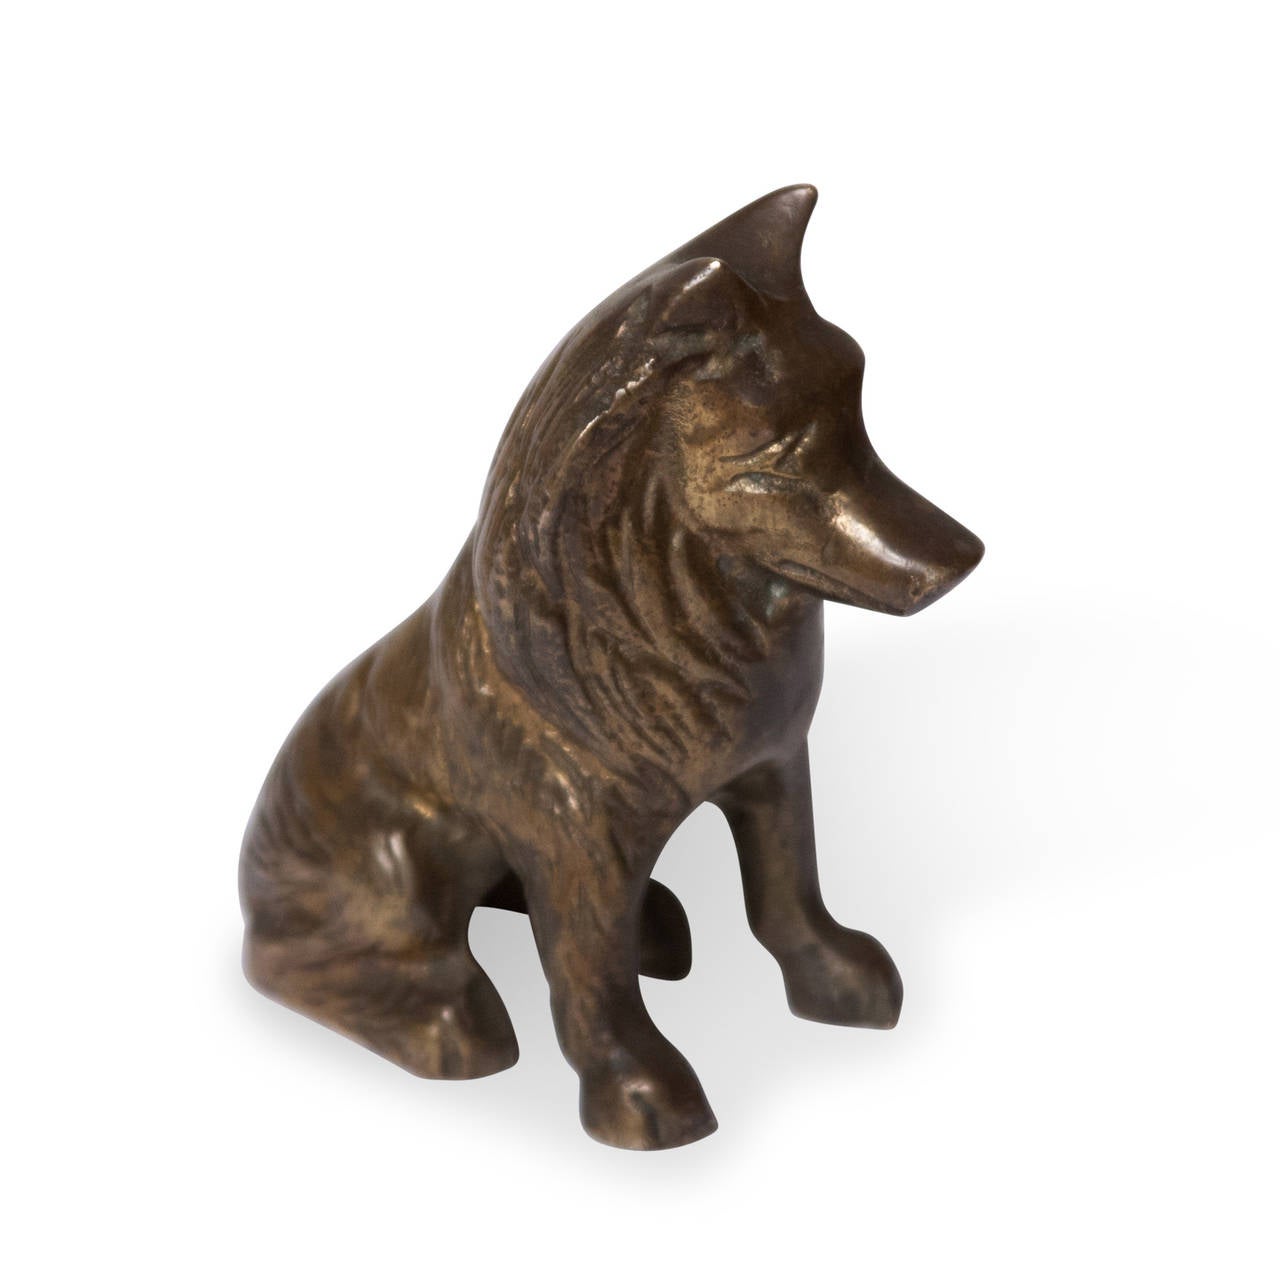 Bronze sculpture of a dog, long furred breed standing on all fours, American, 1960s. Measures: Height 4 in, width 2 in, depth 3 in. (Item #2253 sats)

Holiday rush shipping available! Gift wrap and packaging upon request.